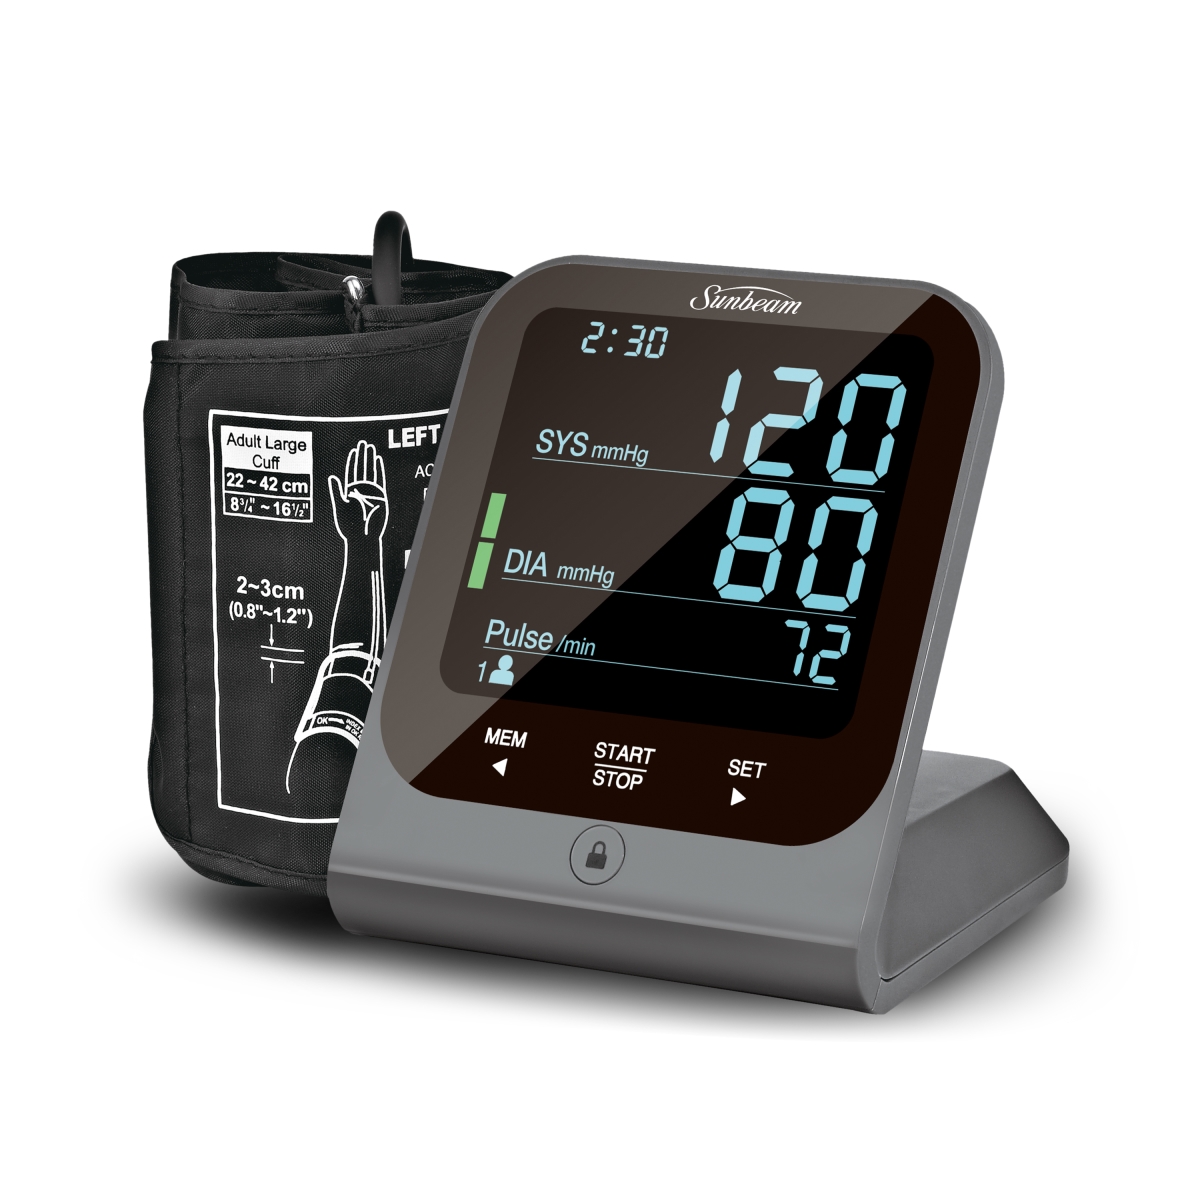 Picture of Sunbeam 16985 Upper Arm Blood Pressure Monitor with Batteries